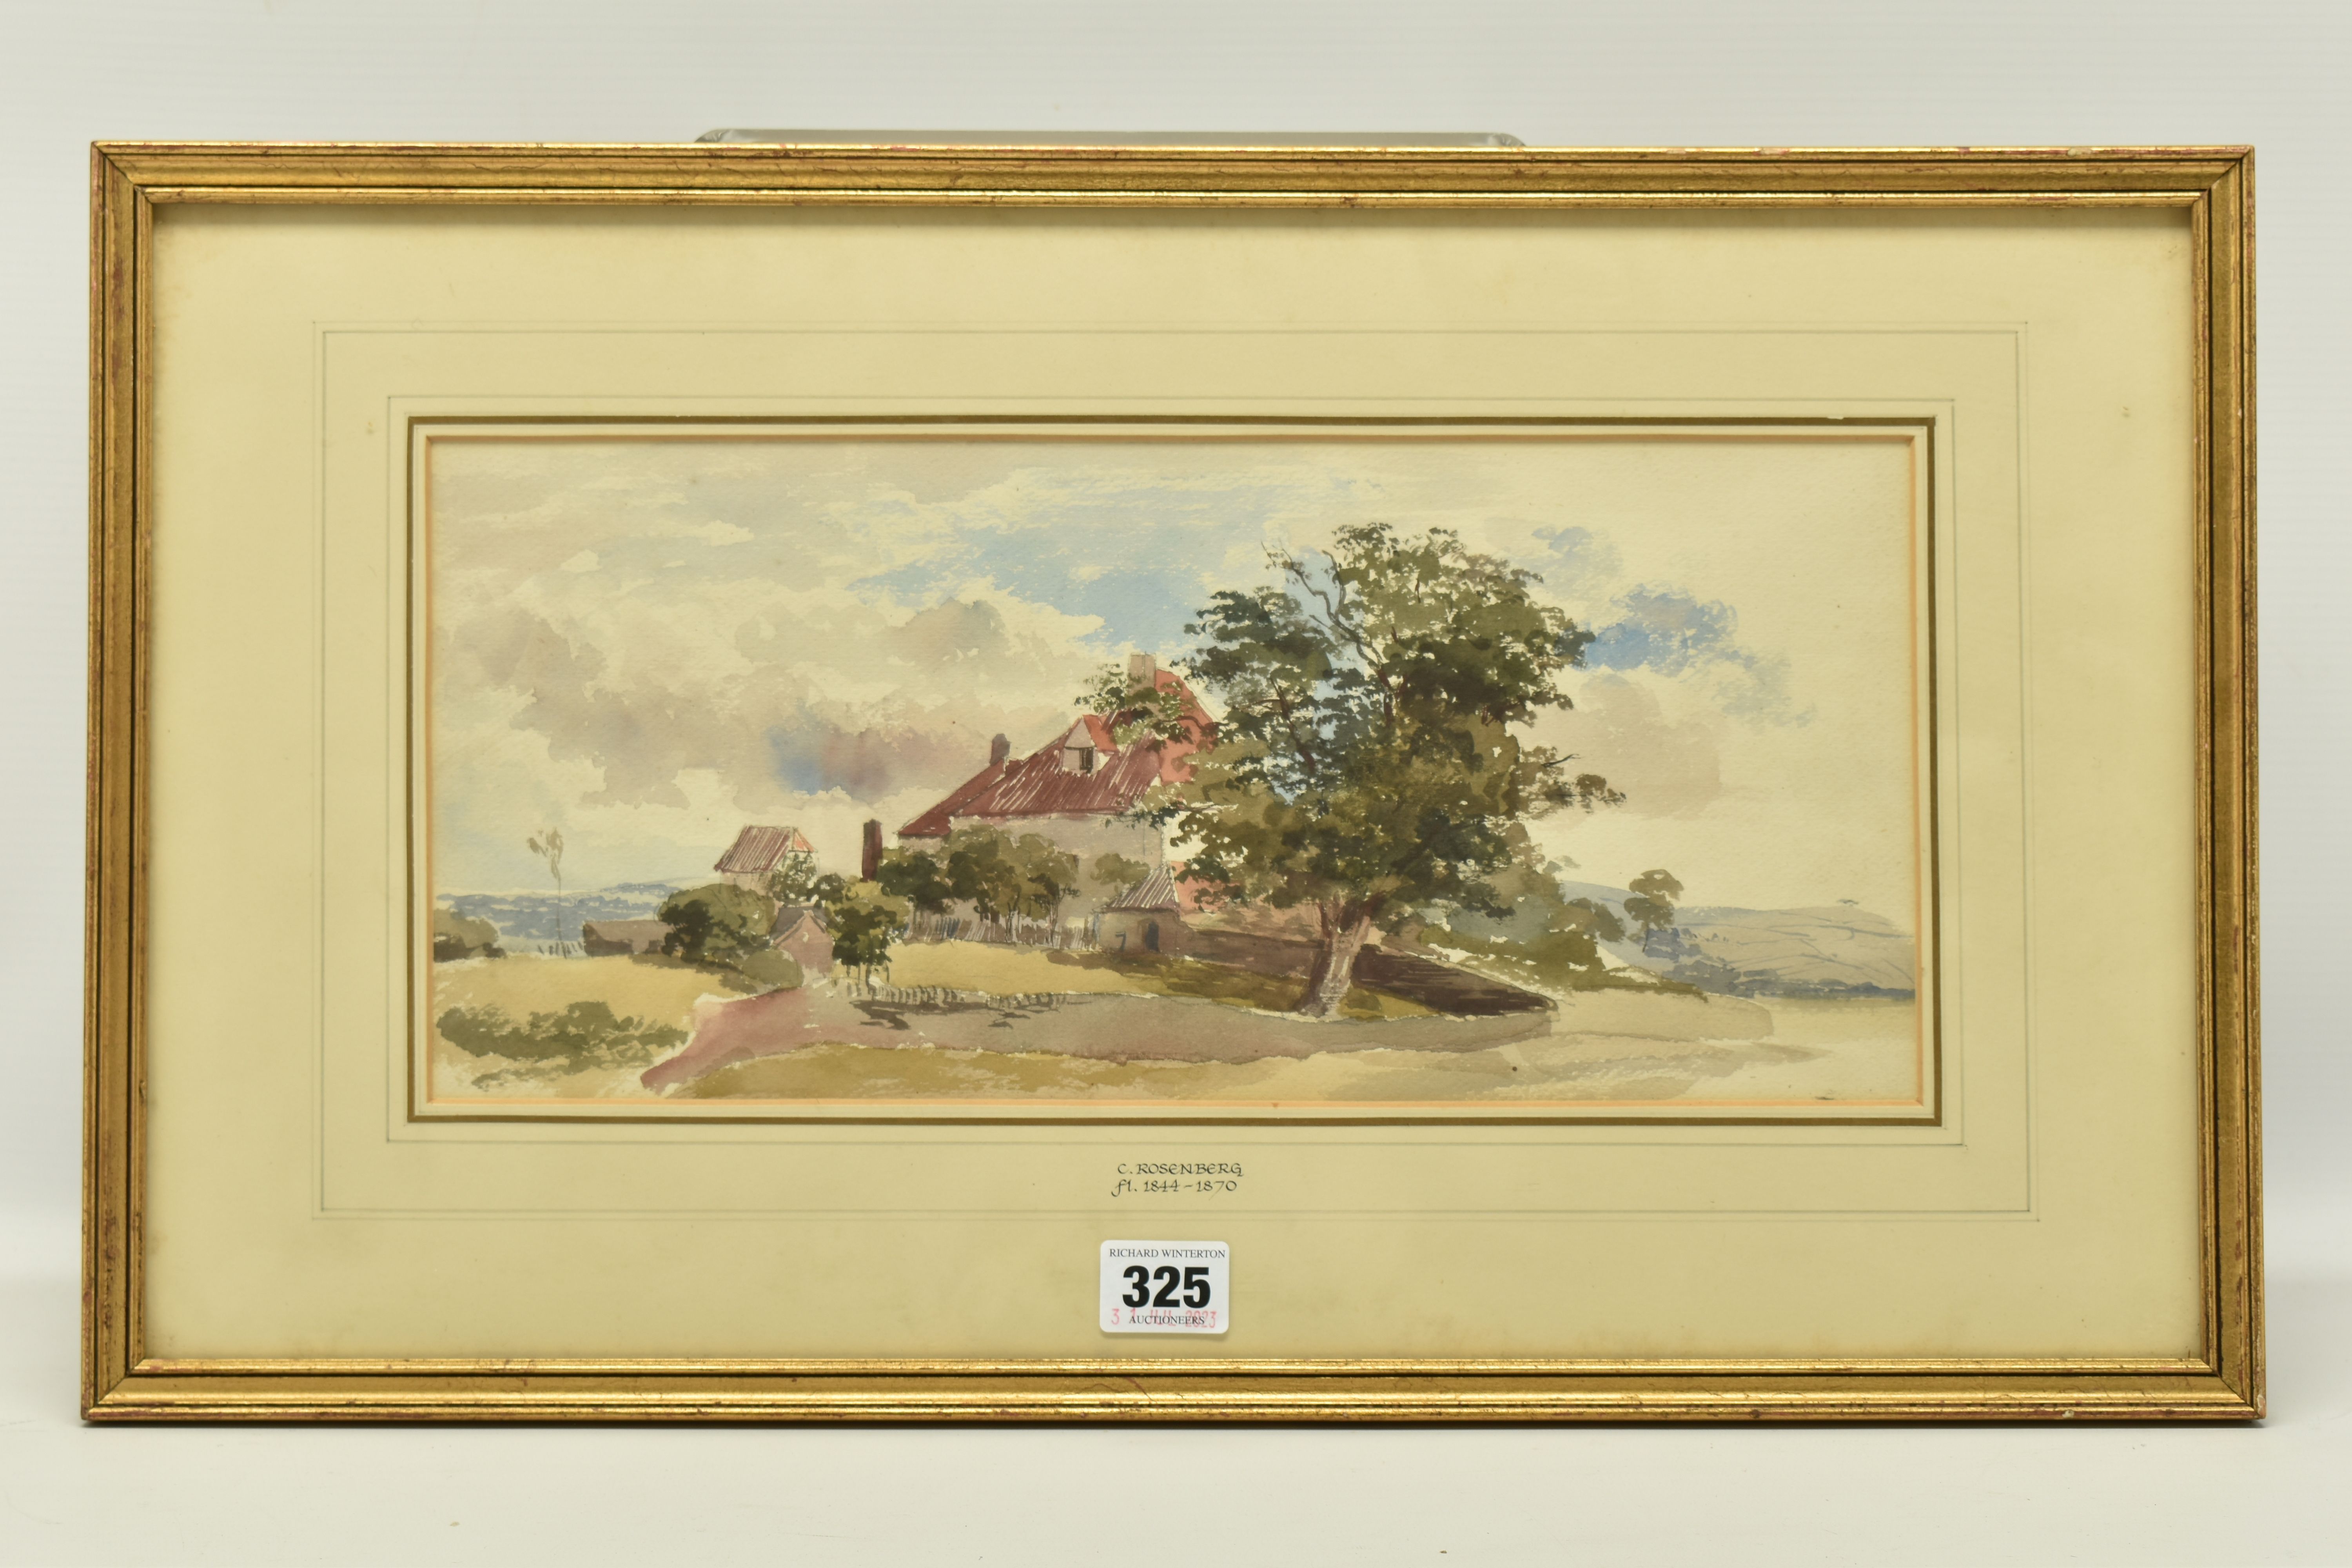 ATTRIBUTED TO CHARLES ROSENBERG (19TH CENTURY) 'WEST COUNTRY FARMSTEAD), a landscape with farm